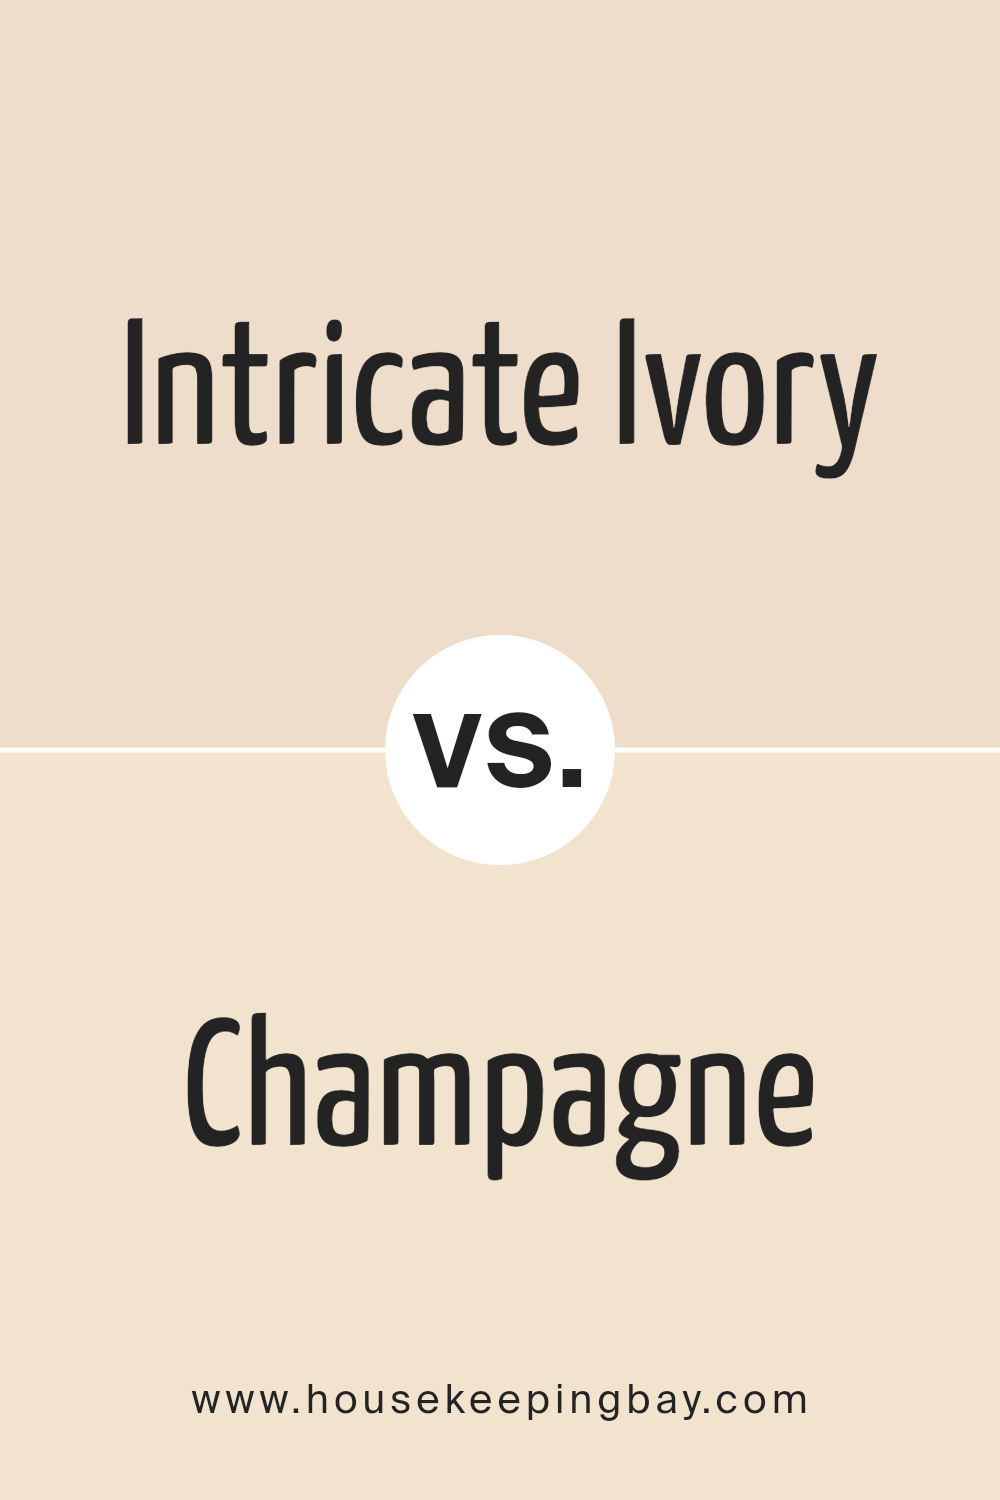 intricate_ivory_sw_6350_vs_champagne_sw_6644